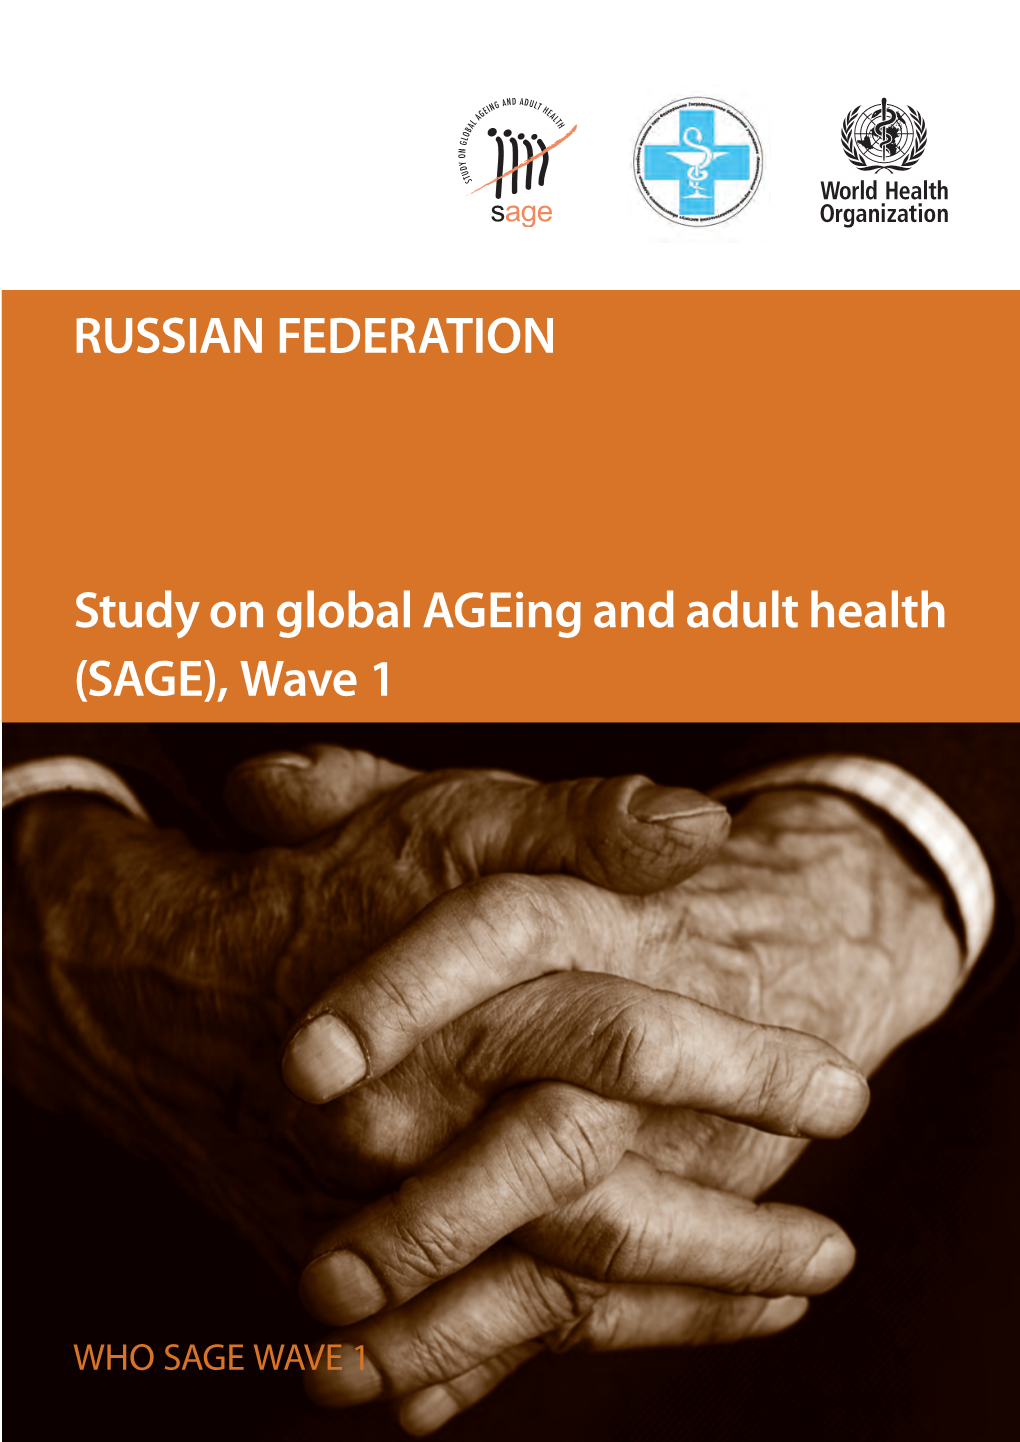 RUSSIAN FEDERATION Study on Global Ageing and Adult Health